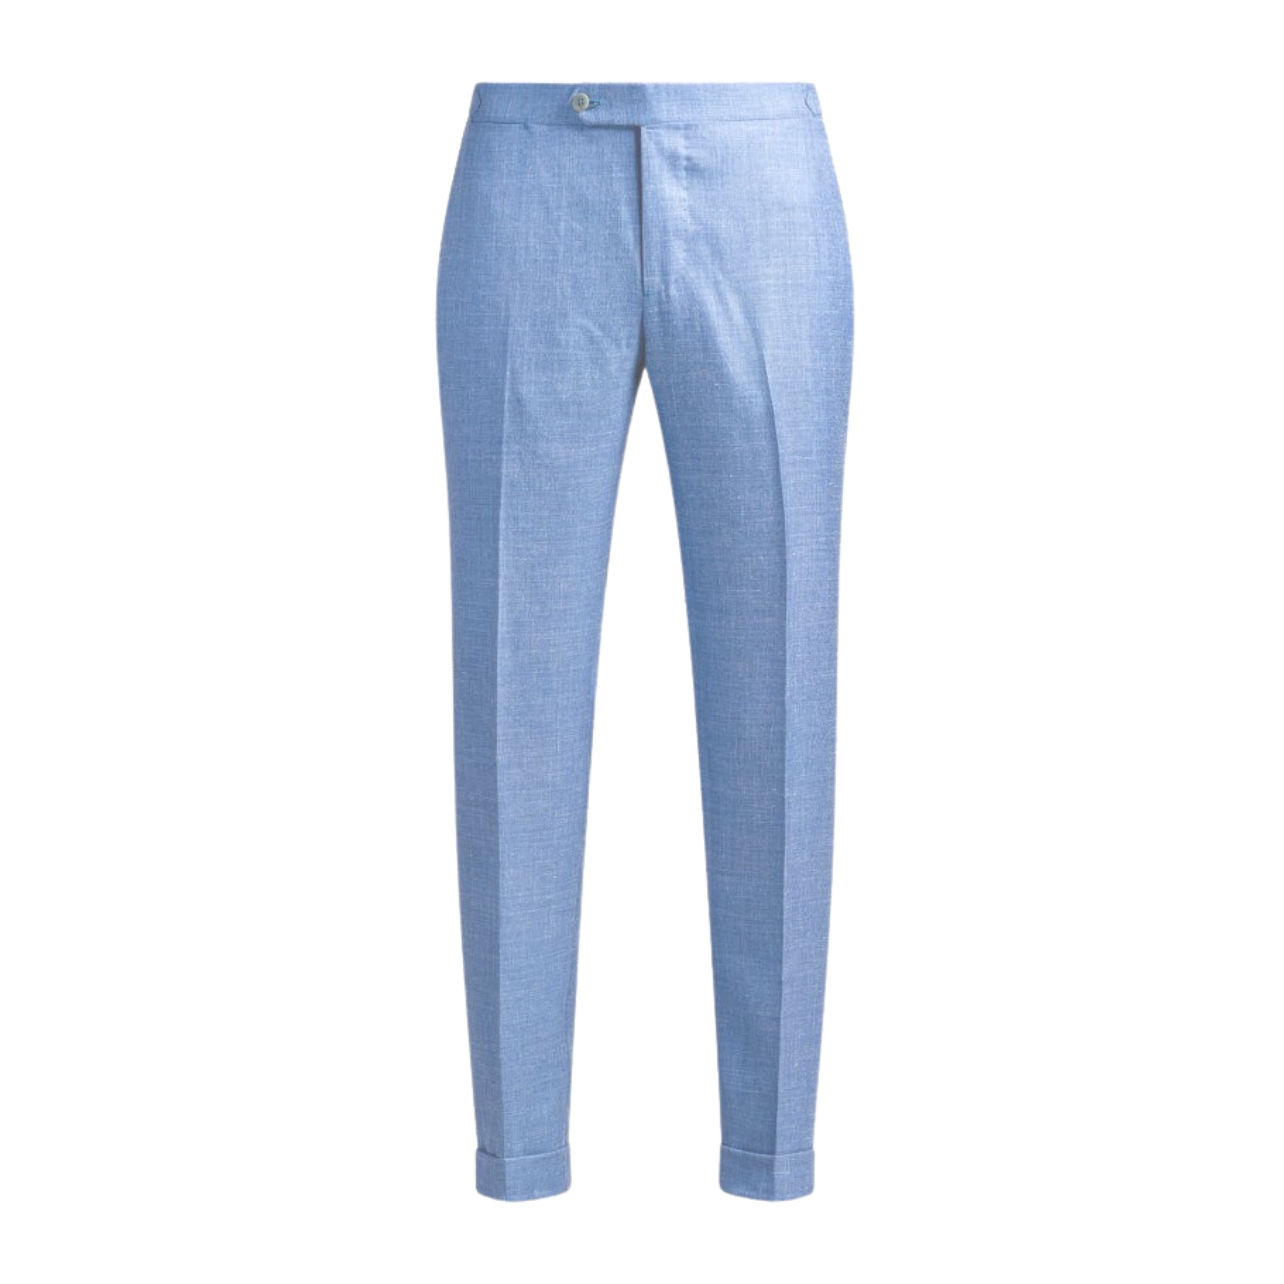 Jeans aren’t tropical. Luckily, the Casalnuovo trousers from Isaia are. In sky blue linen, they have the versatility of a denim, but in an elevated cut and material.